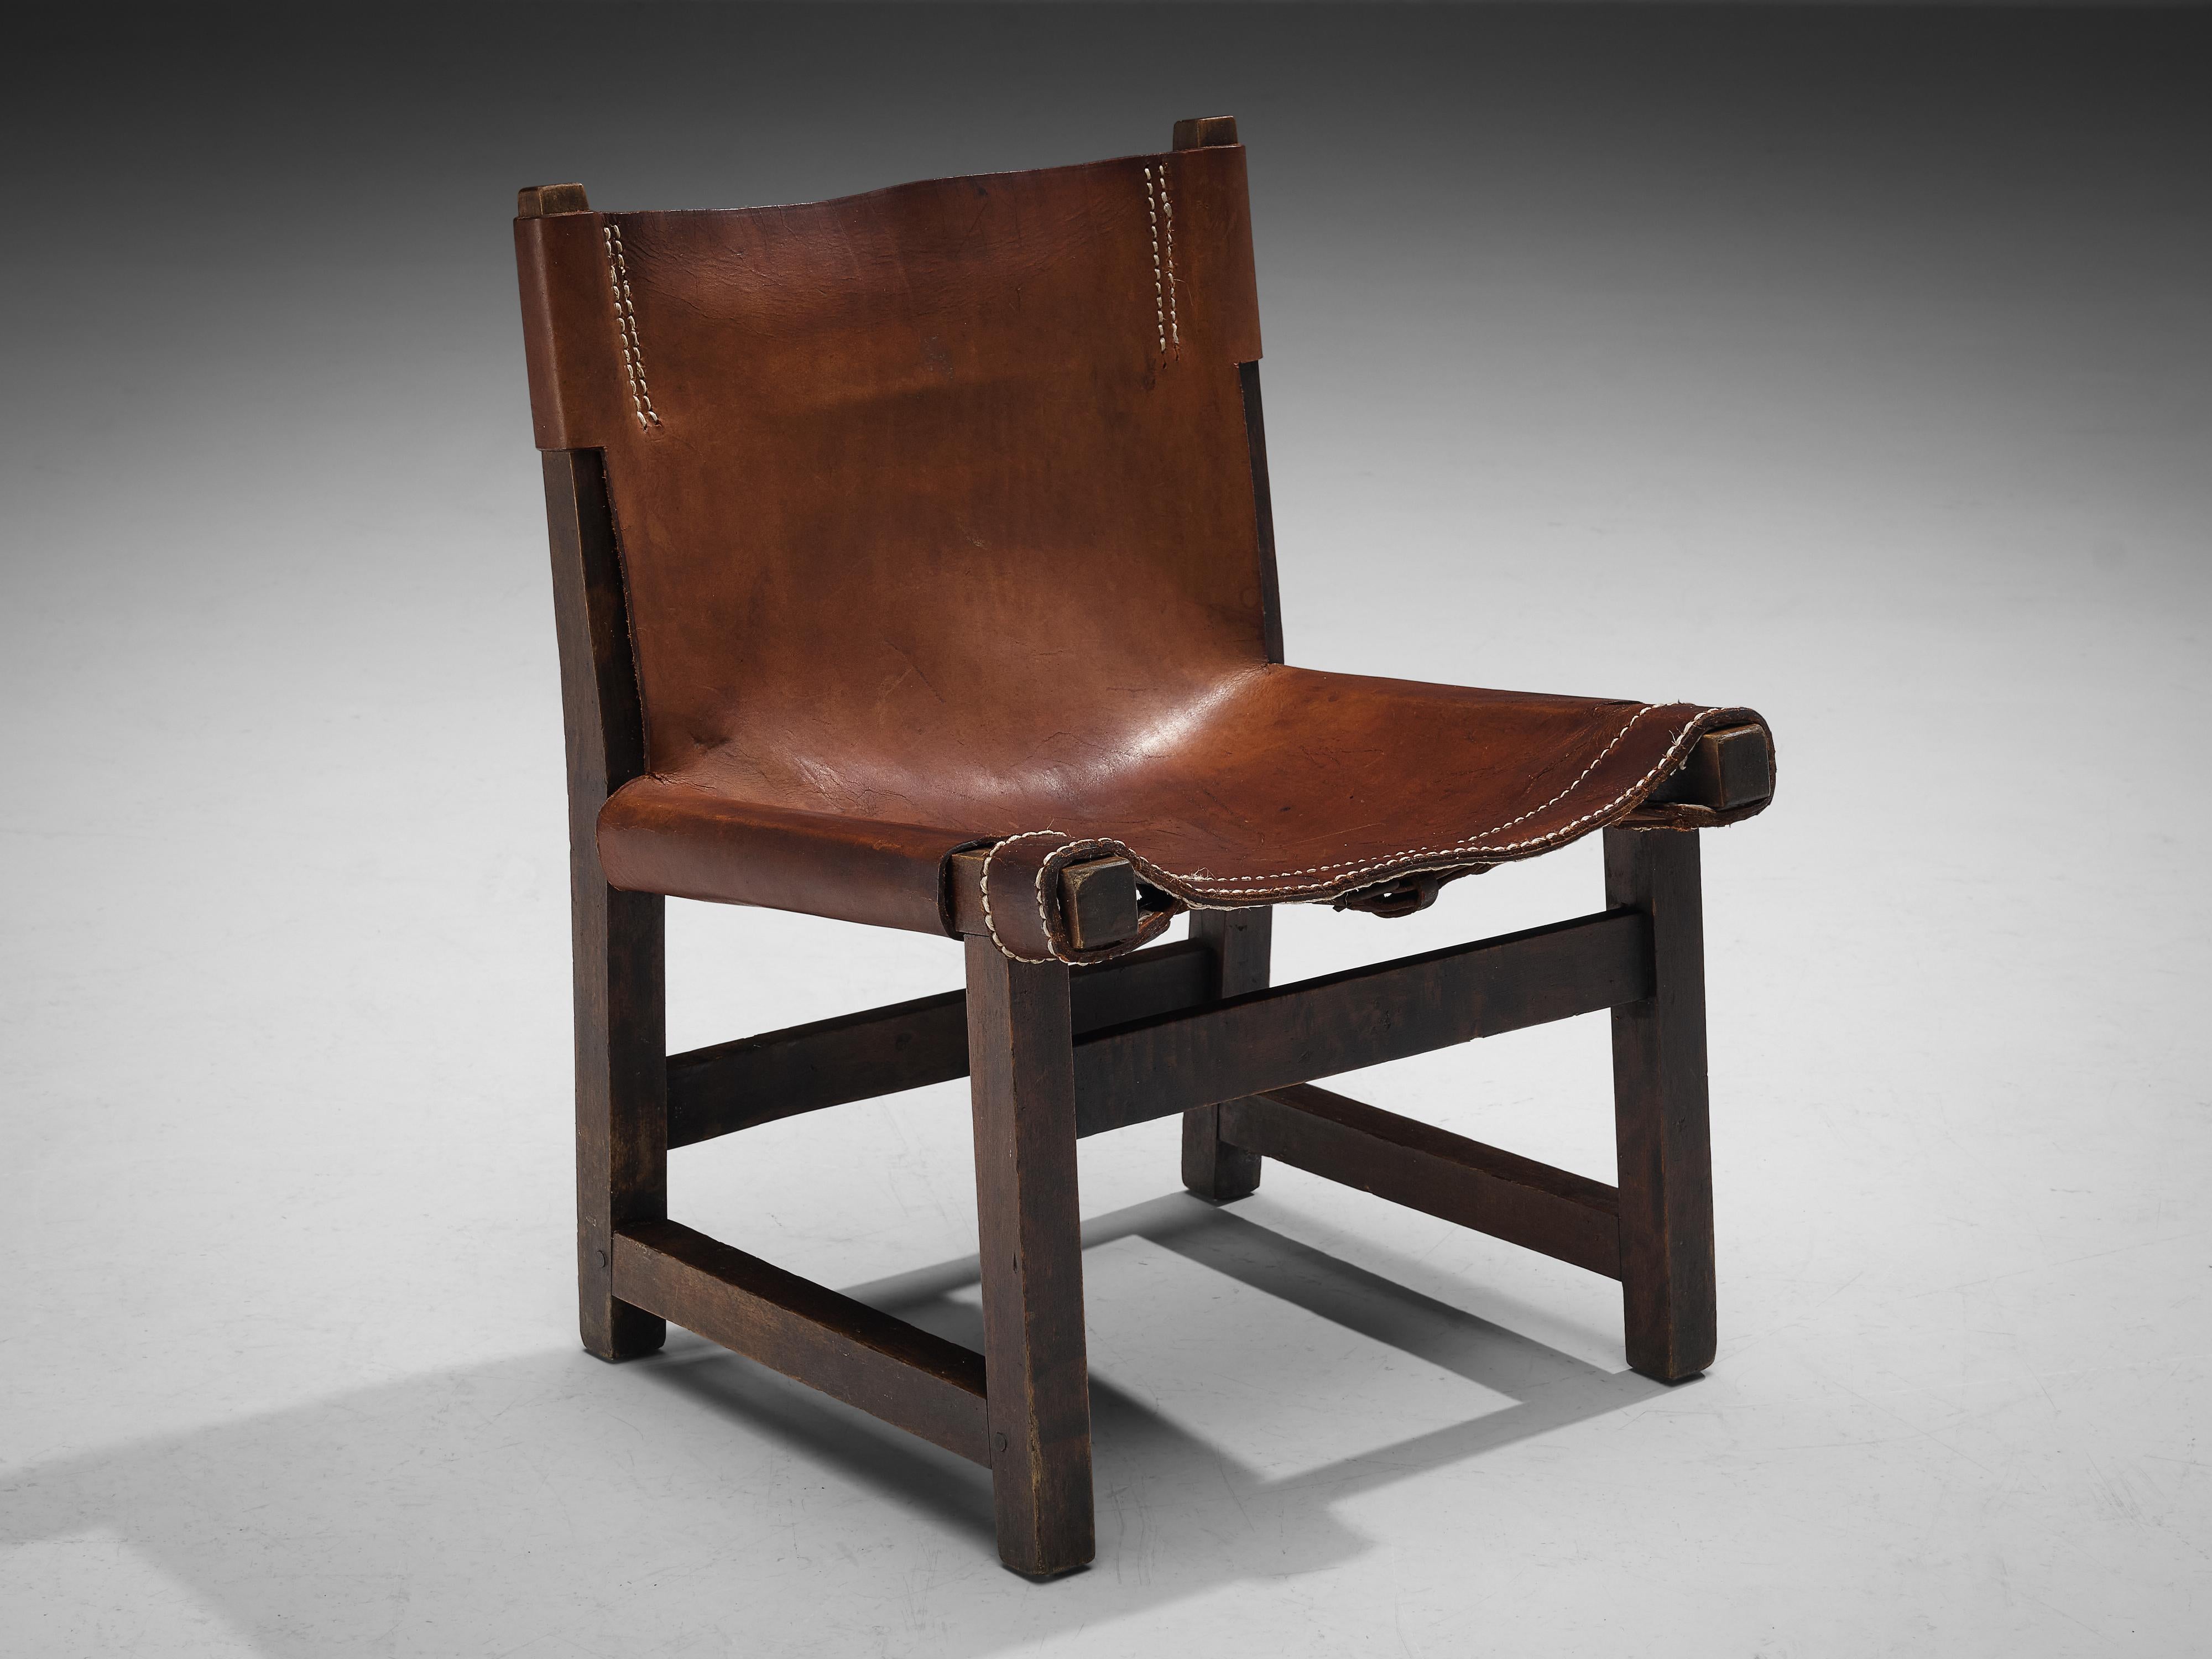 Paco Muñoz for Darro, 'Riaza' chair for children, samara, leather, metal, Spain, 1960s

This robust and resilient low lounge chair, a creation of Paco Muñoz from the 1960s, epitomizes refined design. Resembling a hunting chair, its distinctive